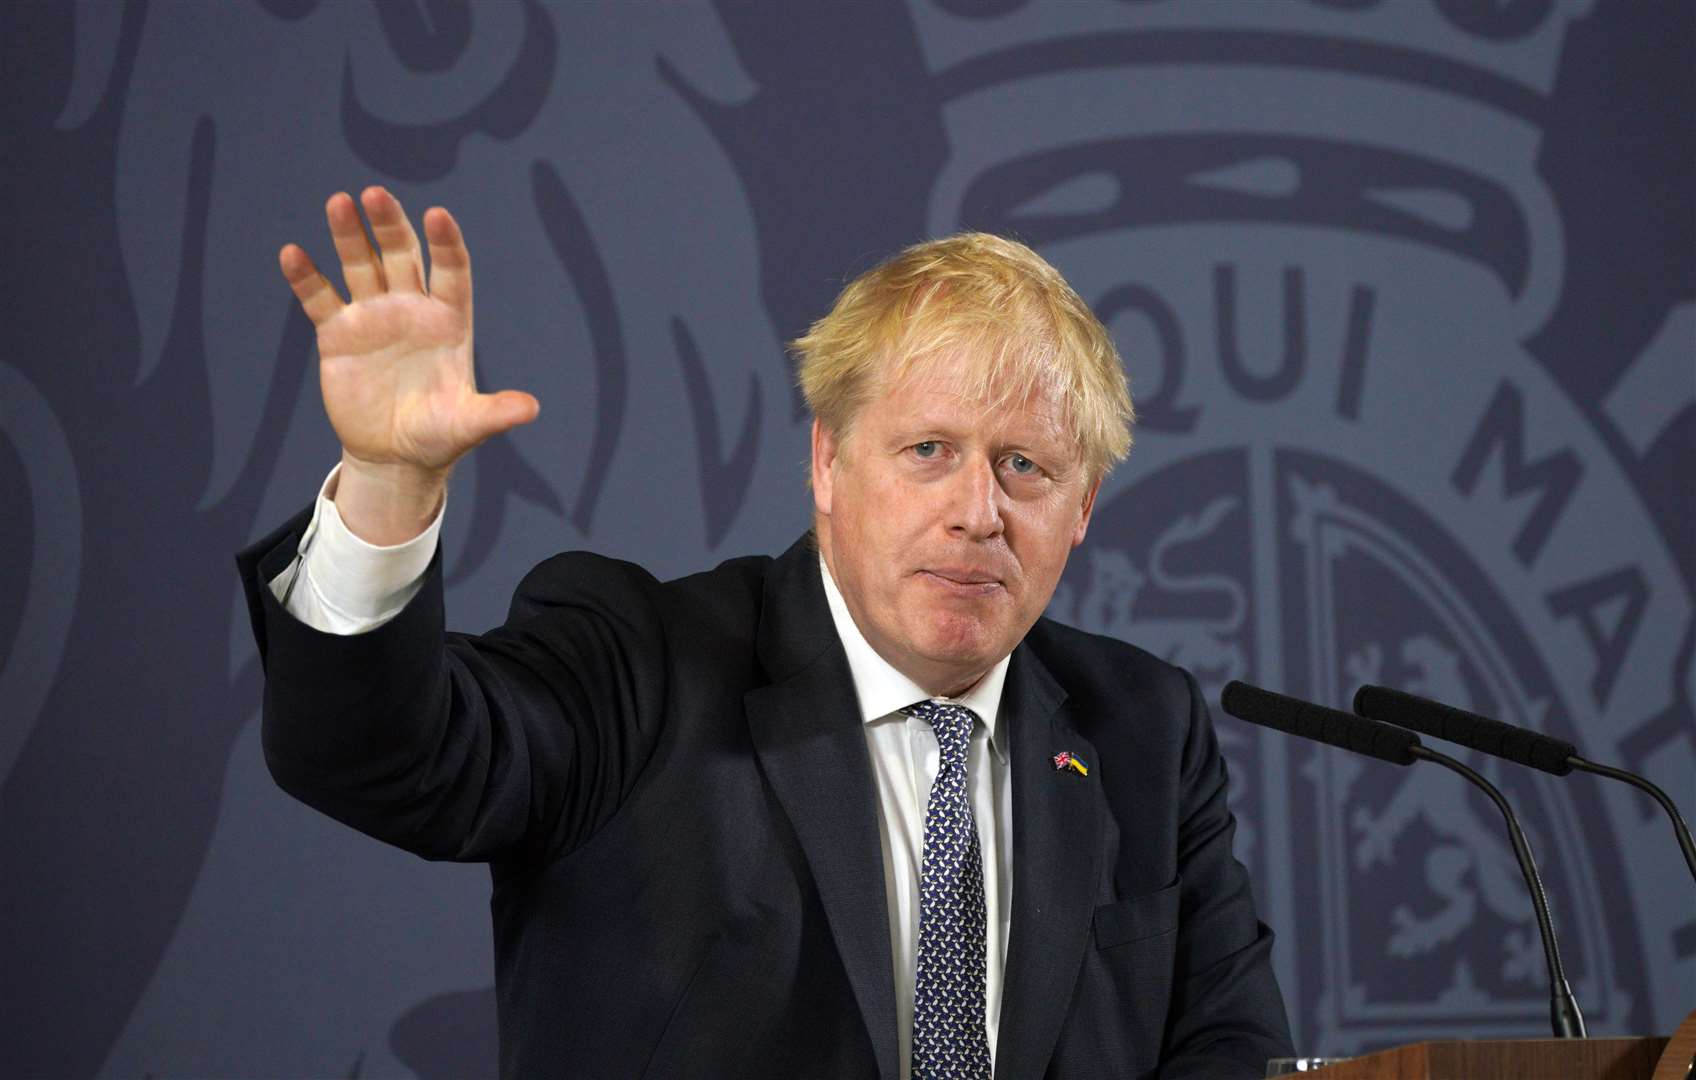 Prime Minister Boris Johnson during his speech at Blackpool and The Fylde College (Peter Byrne/PA)